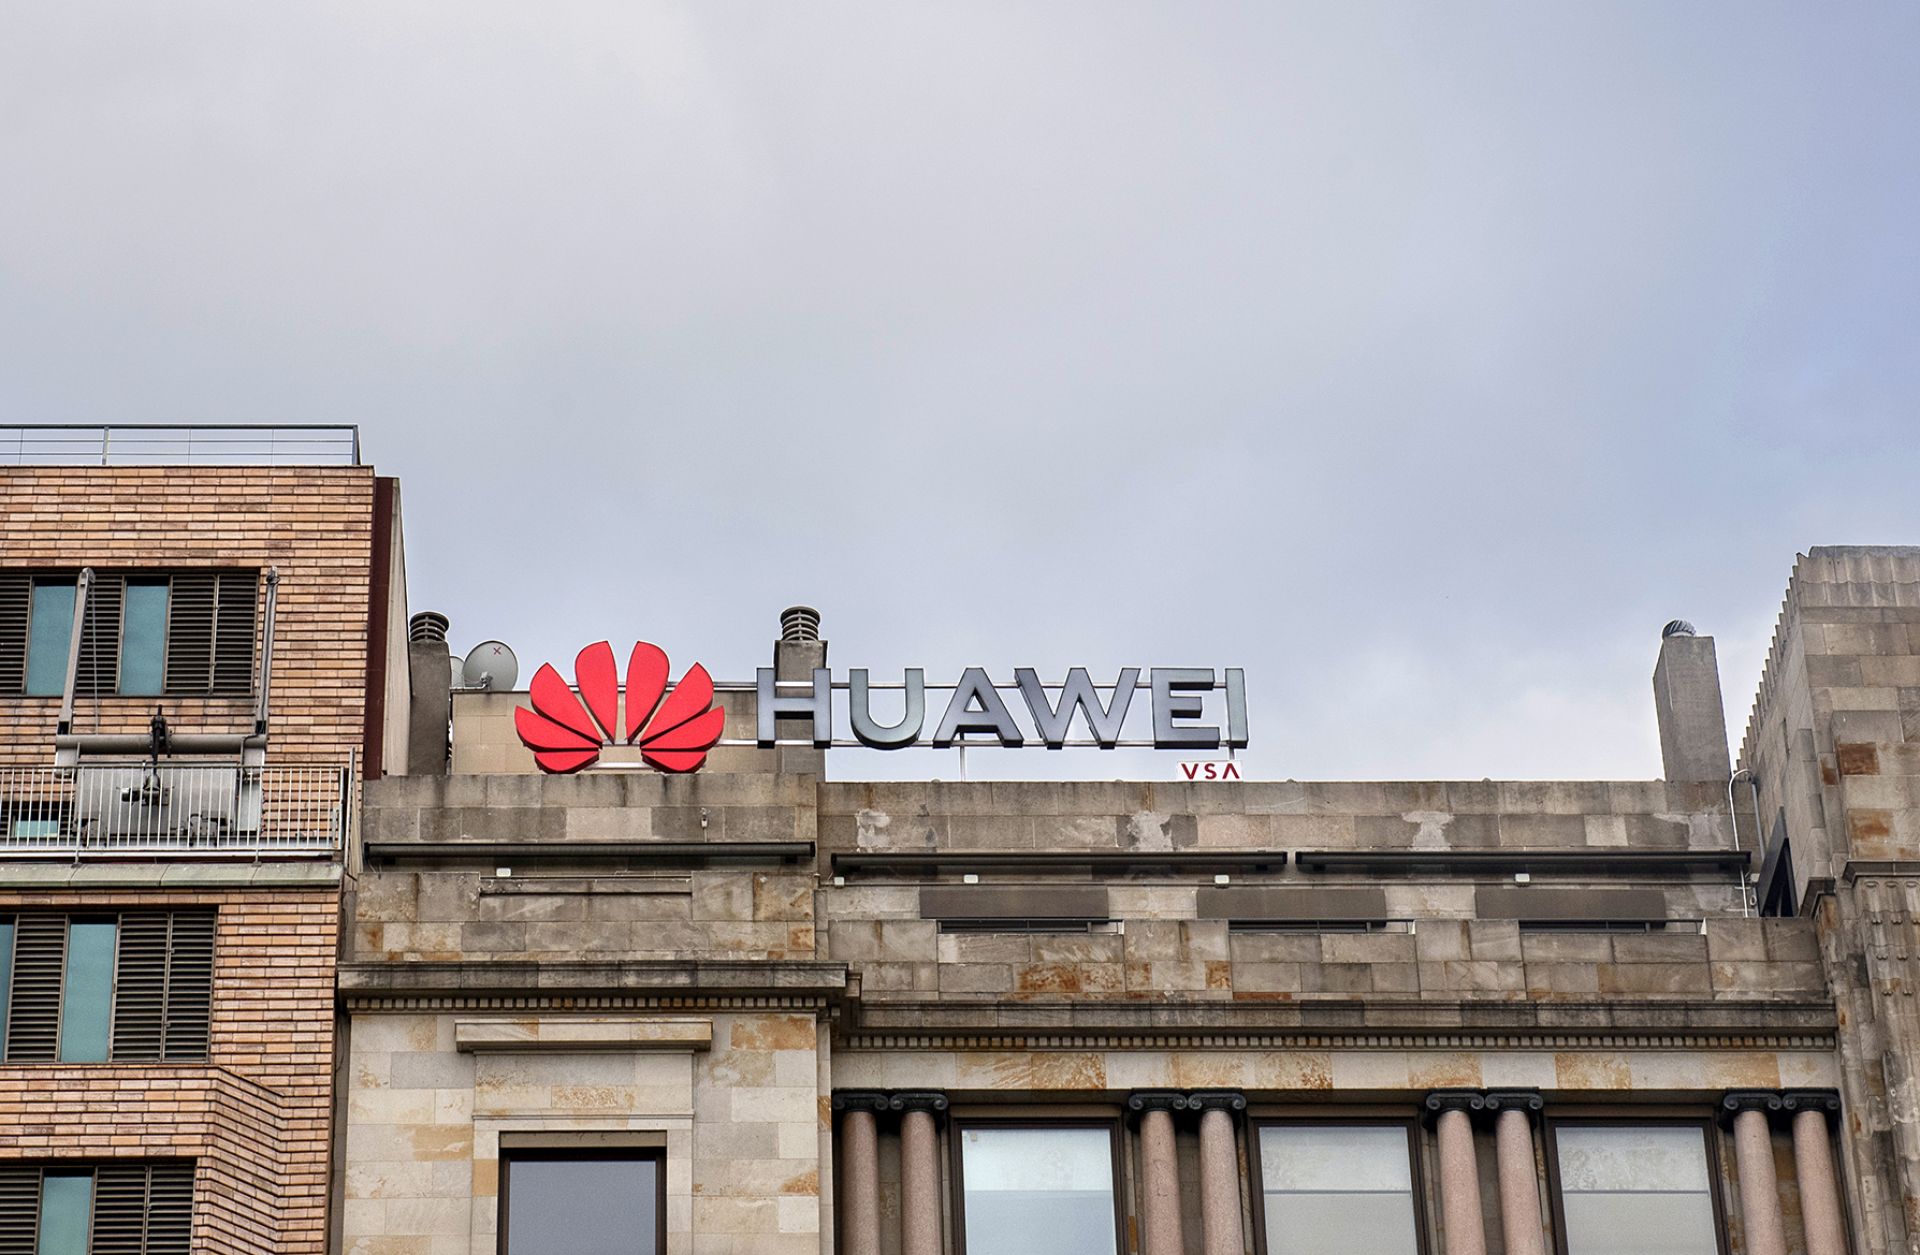 A Huawei logo looms over a street in Barcelona, Spain.